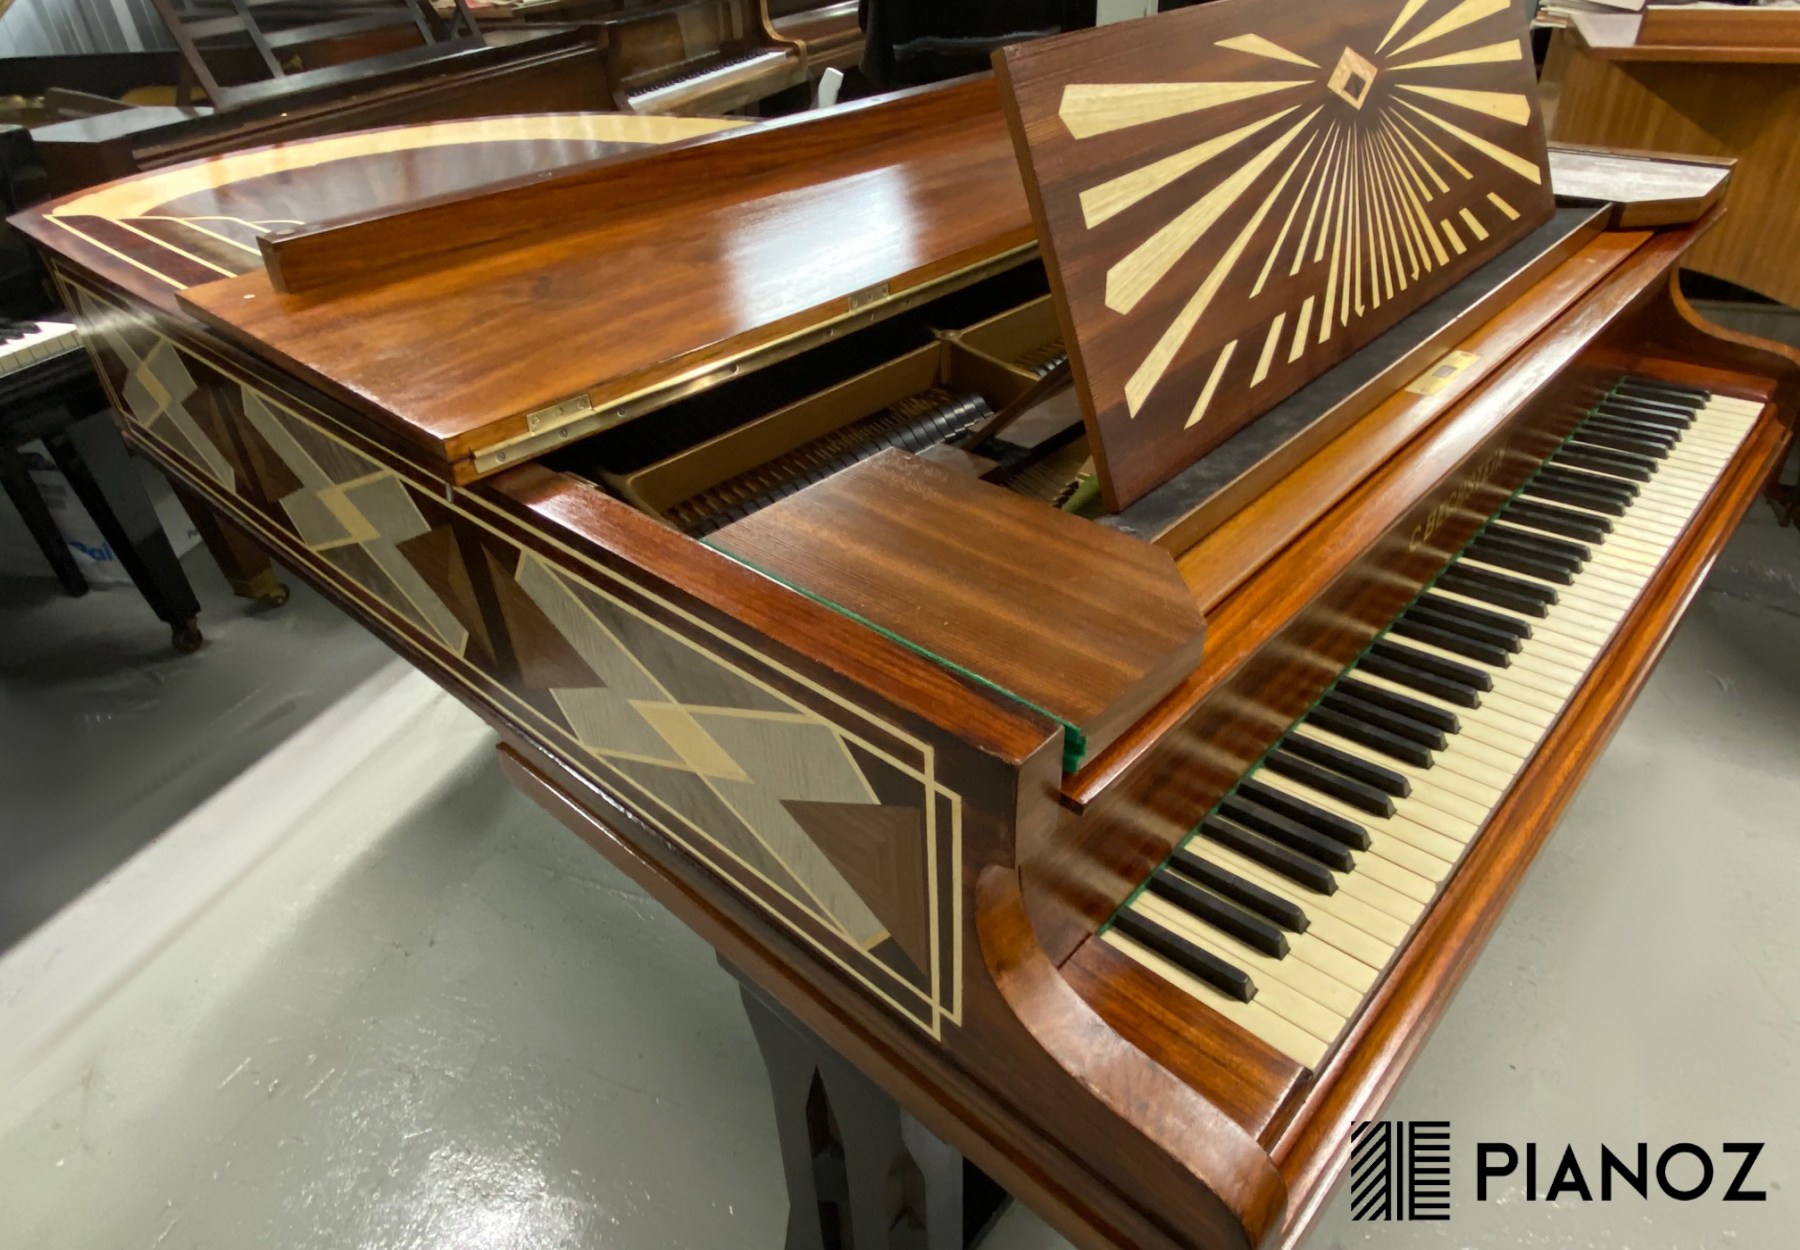 C. Bechstein  Model A Art Case Grand Piano piano for sale in UK